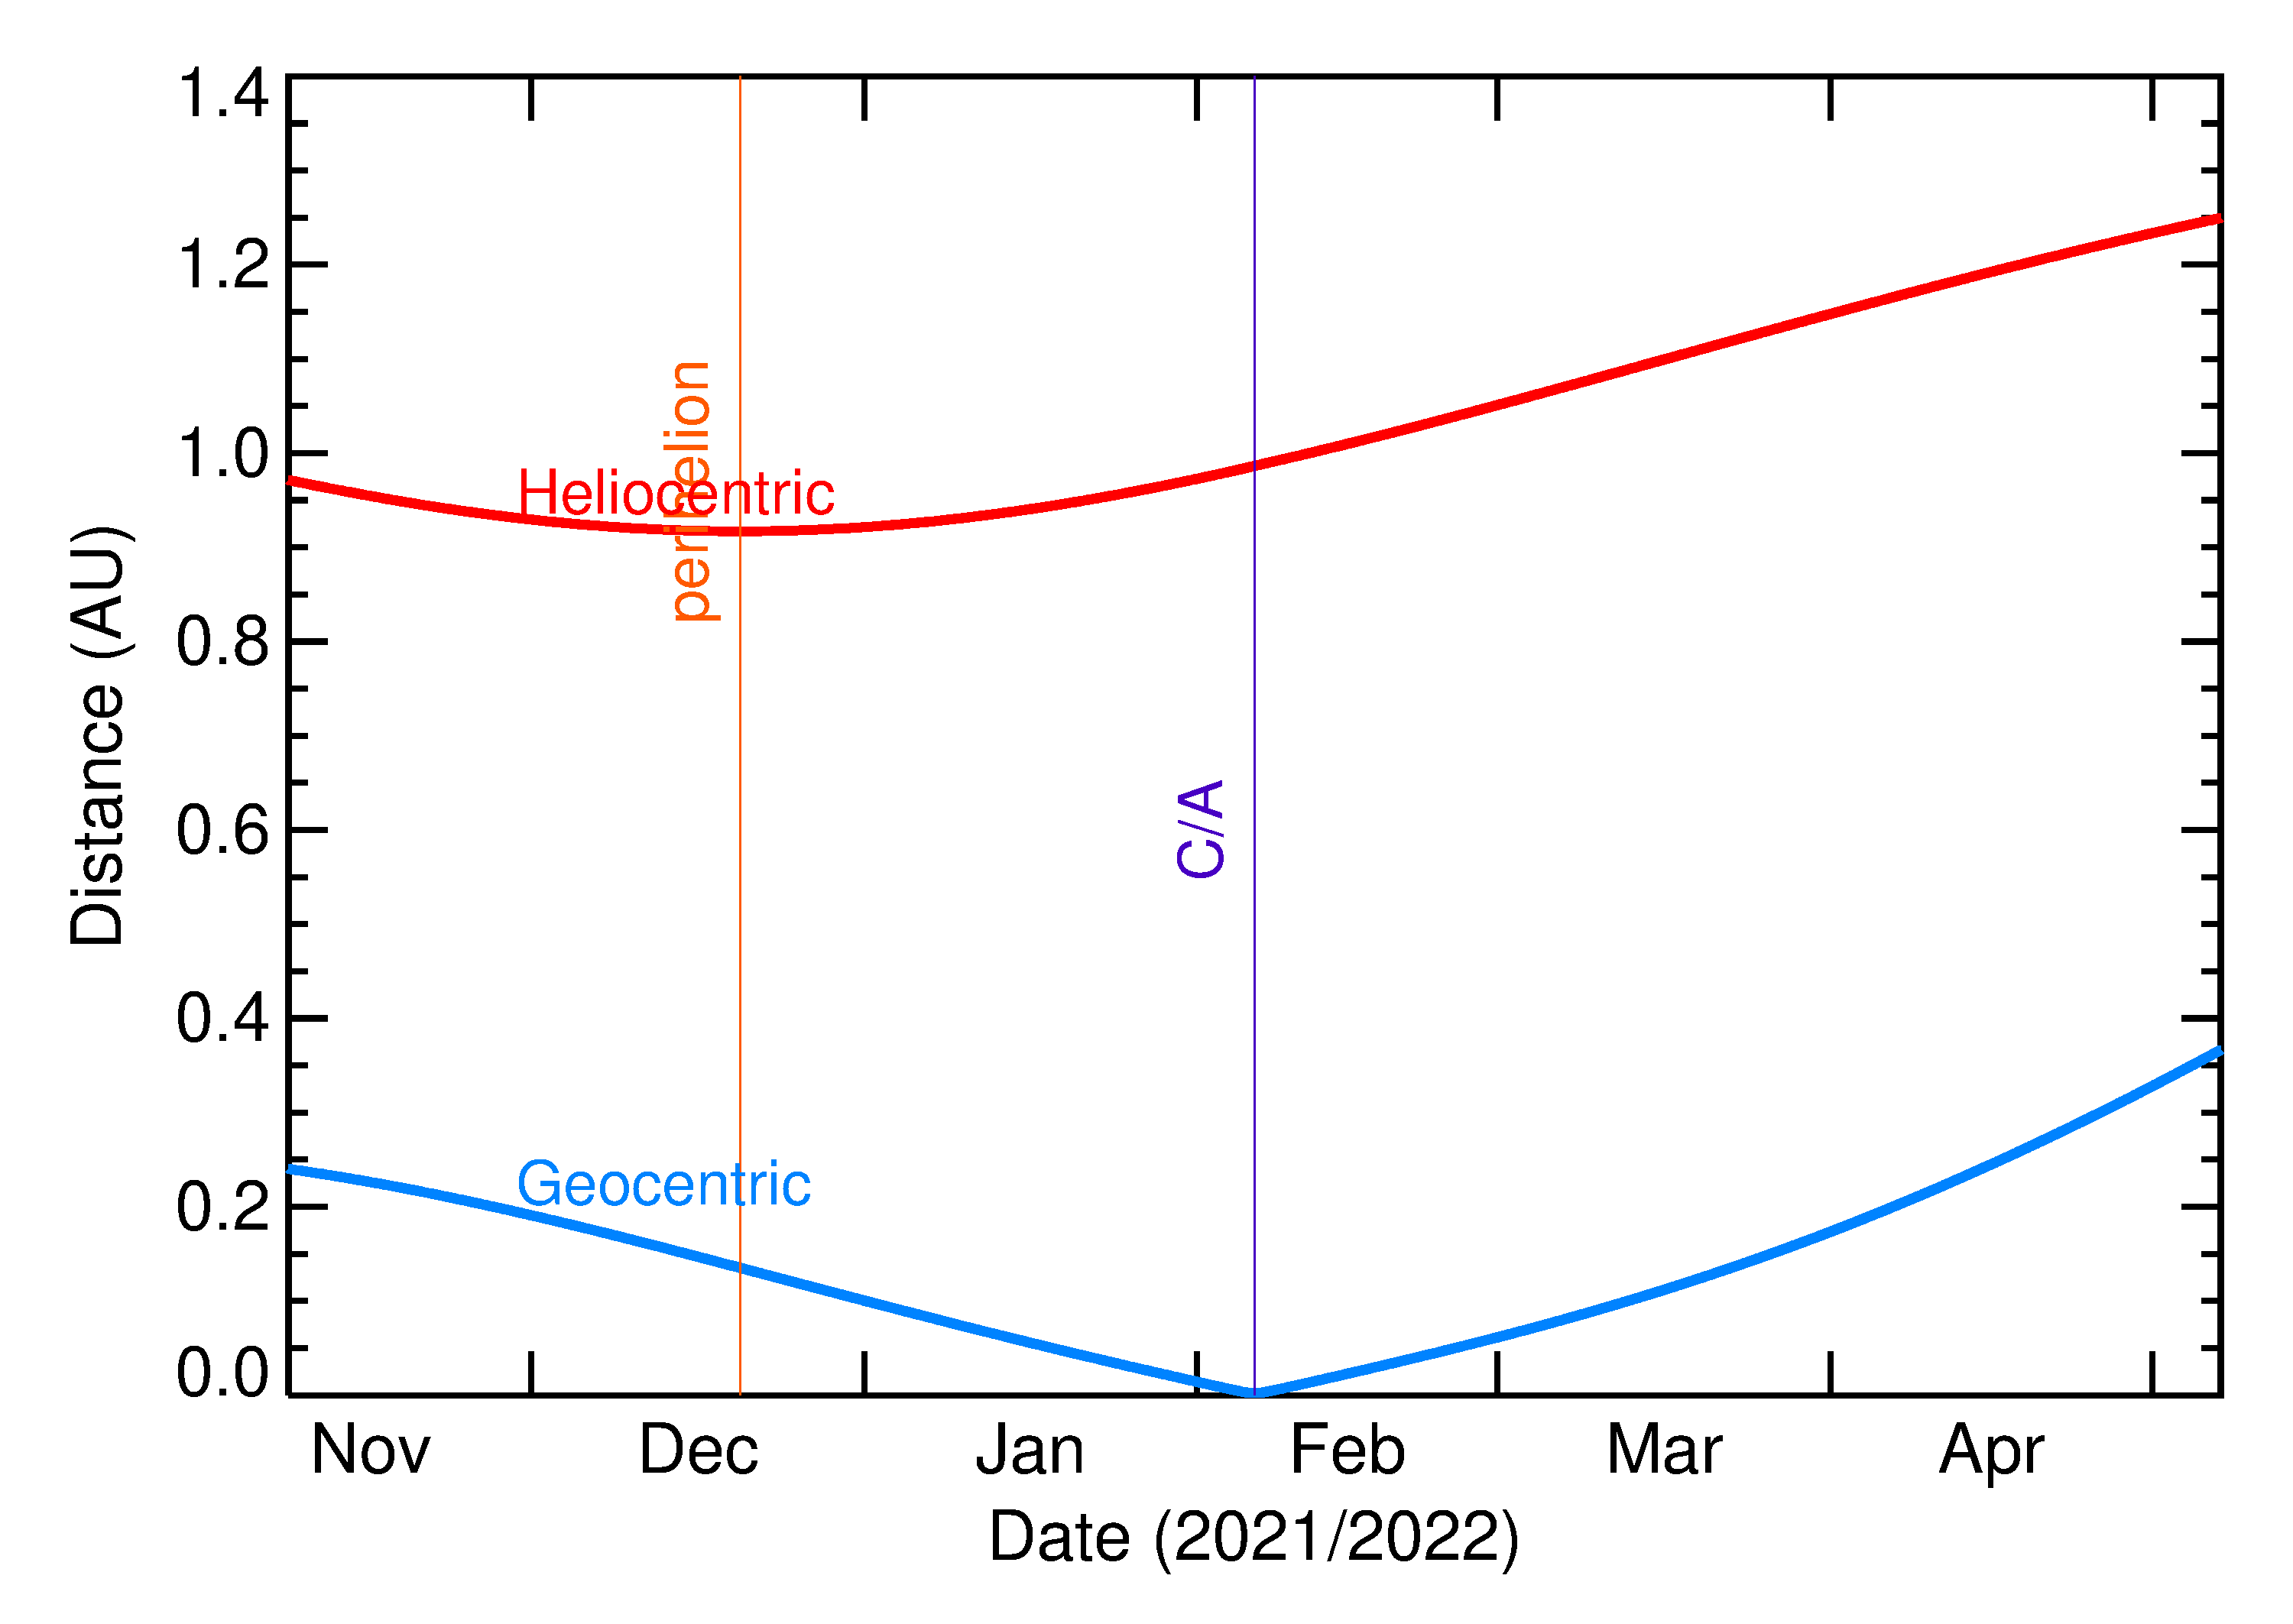 Heliocentric and Geocentric Distances of 2022 CU4 in the months around closest approach